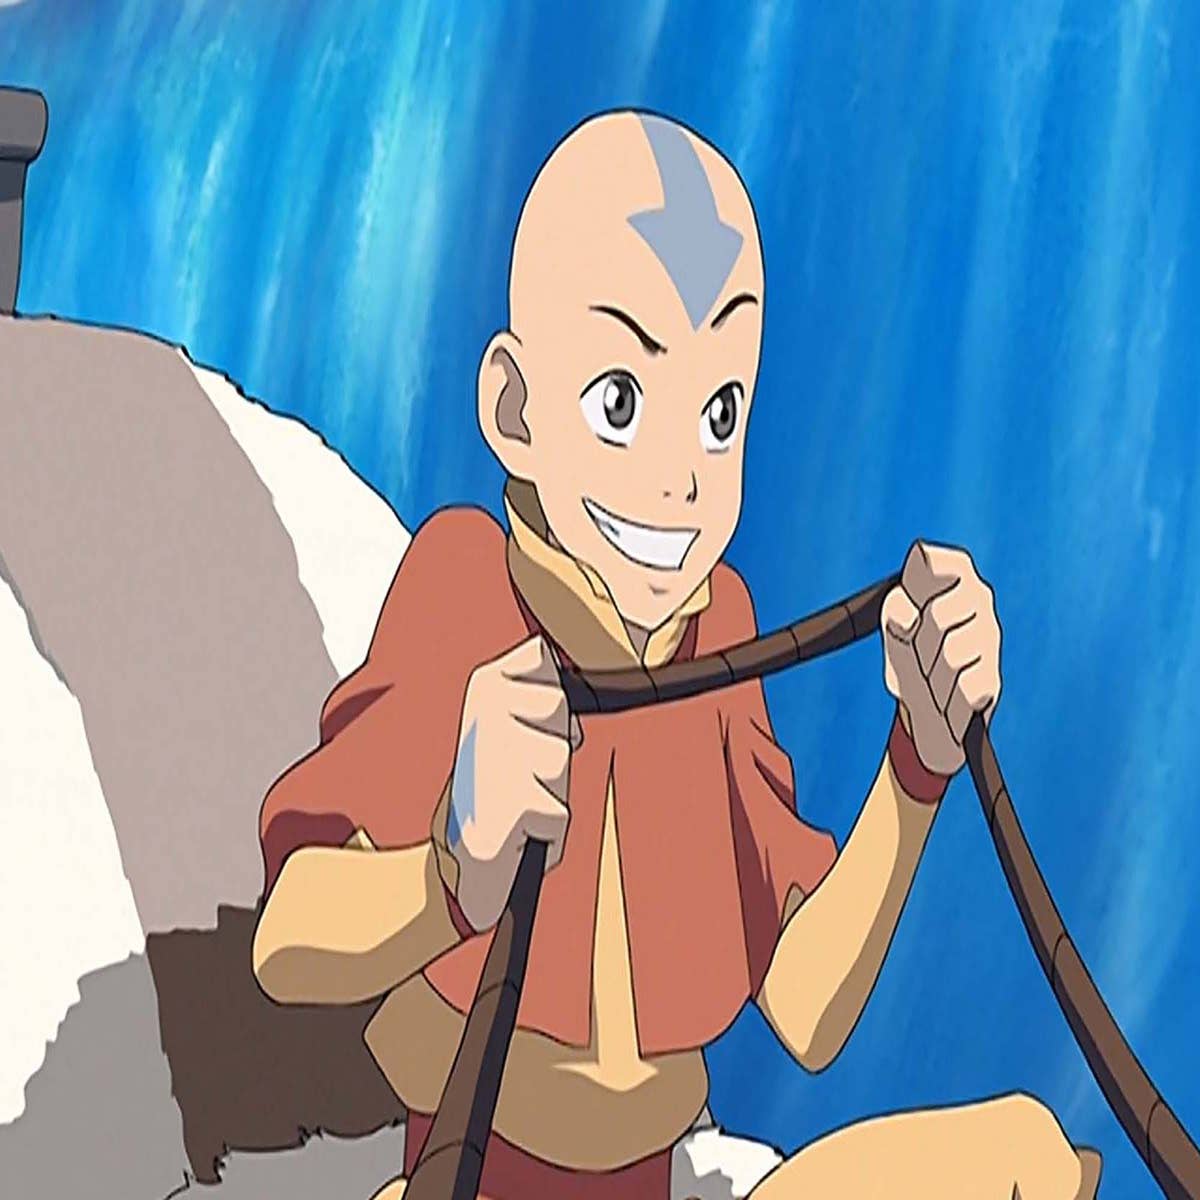 Watch Avatar: The Legend of Aang on TV